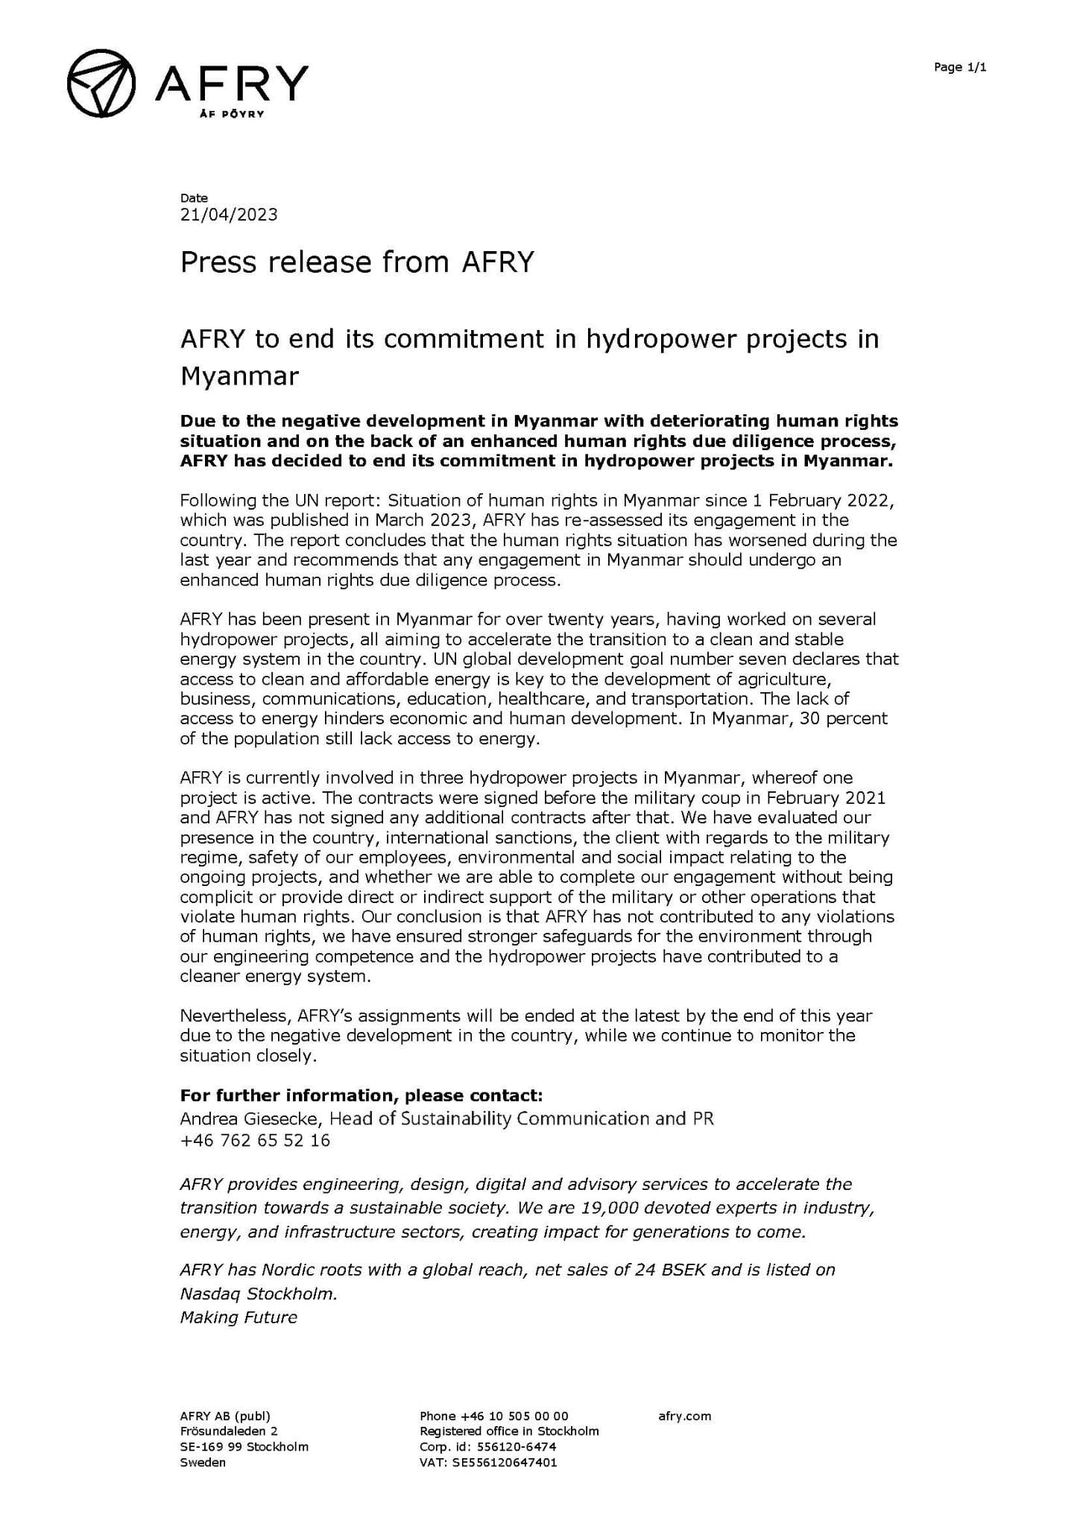 AFRY to end its commitment in hydropower projects in Myanmar